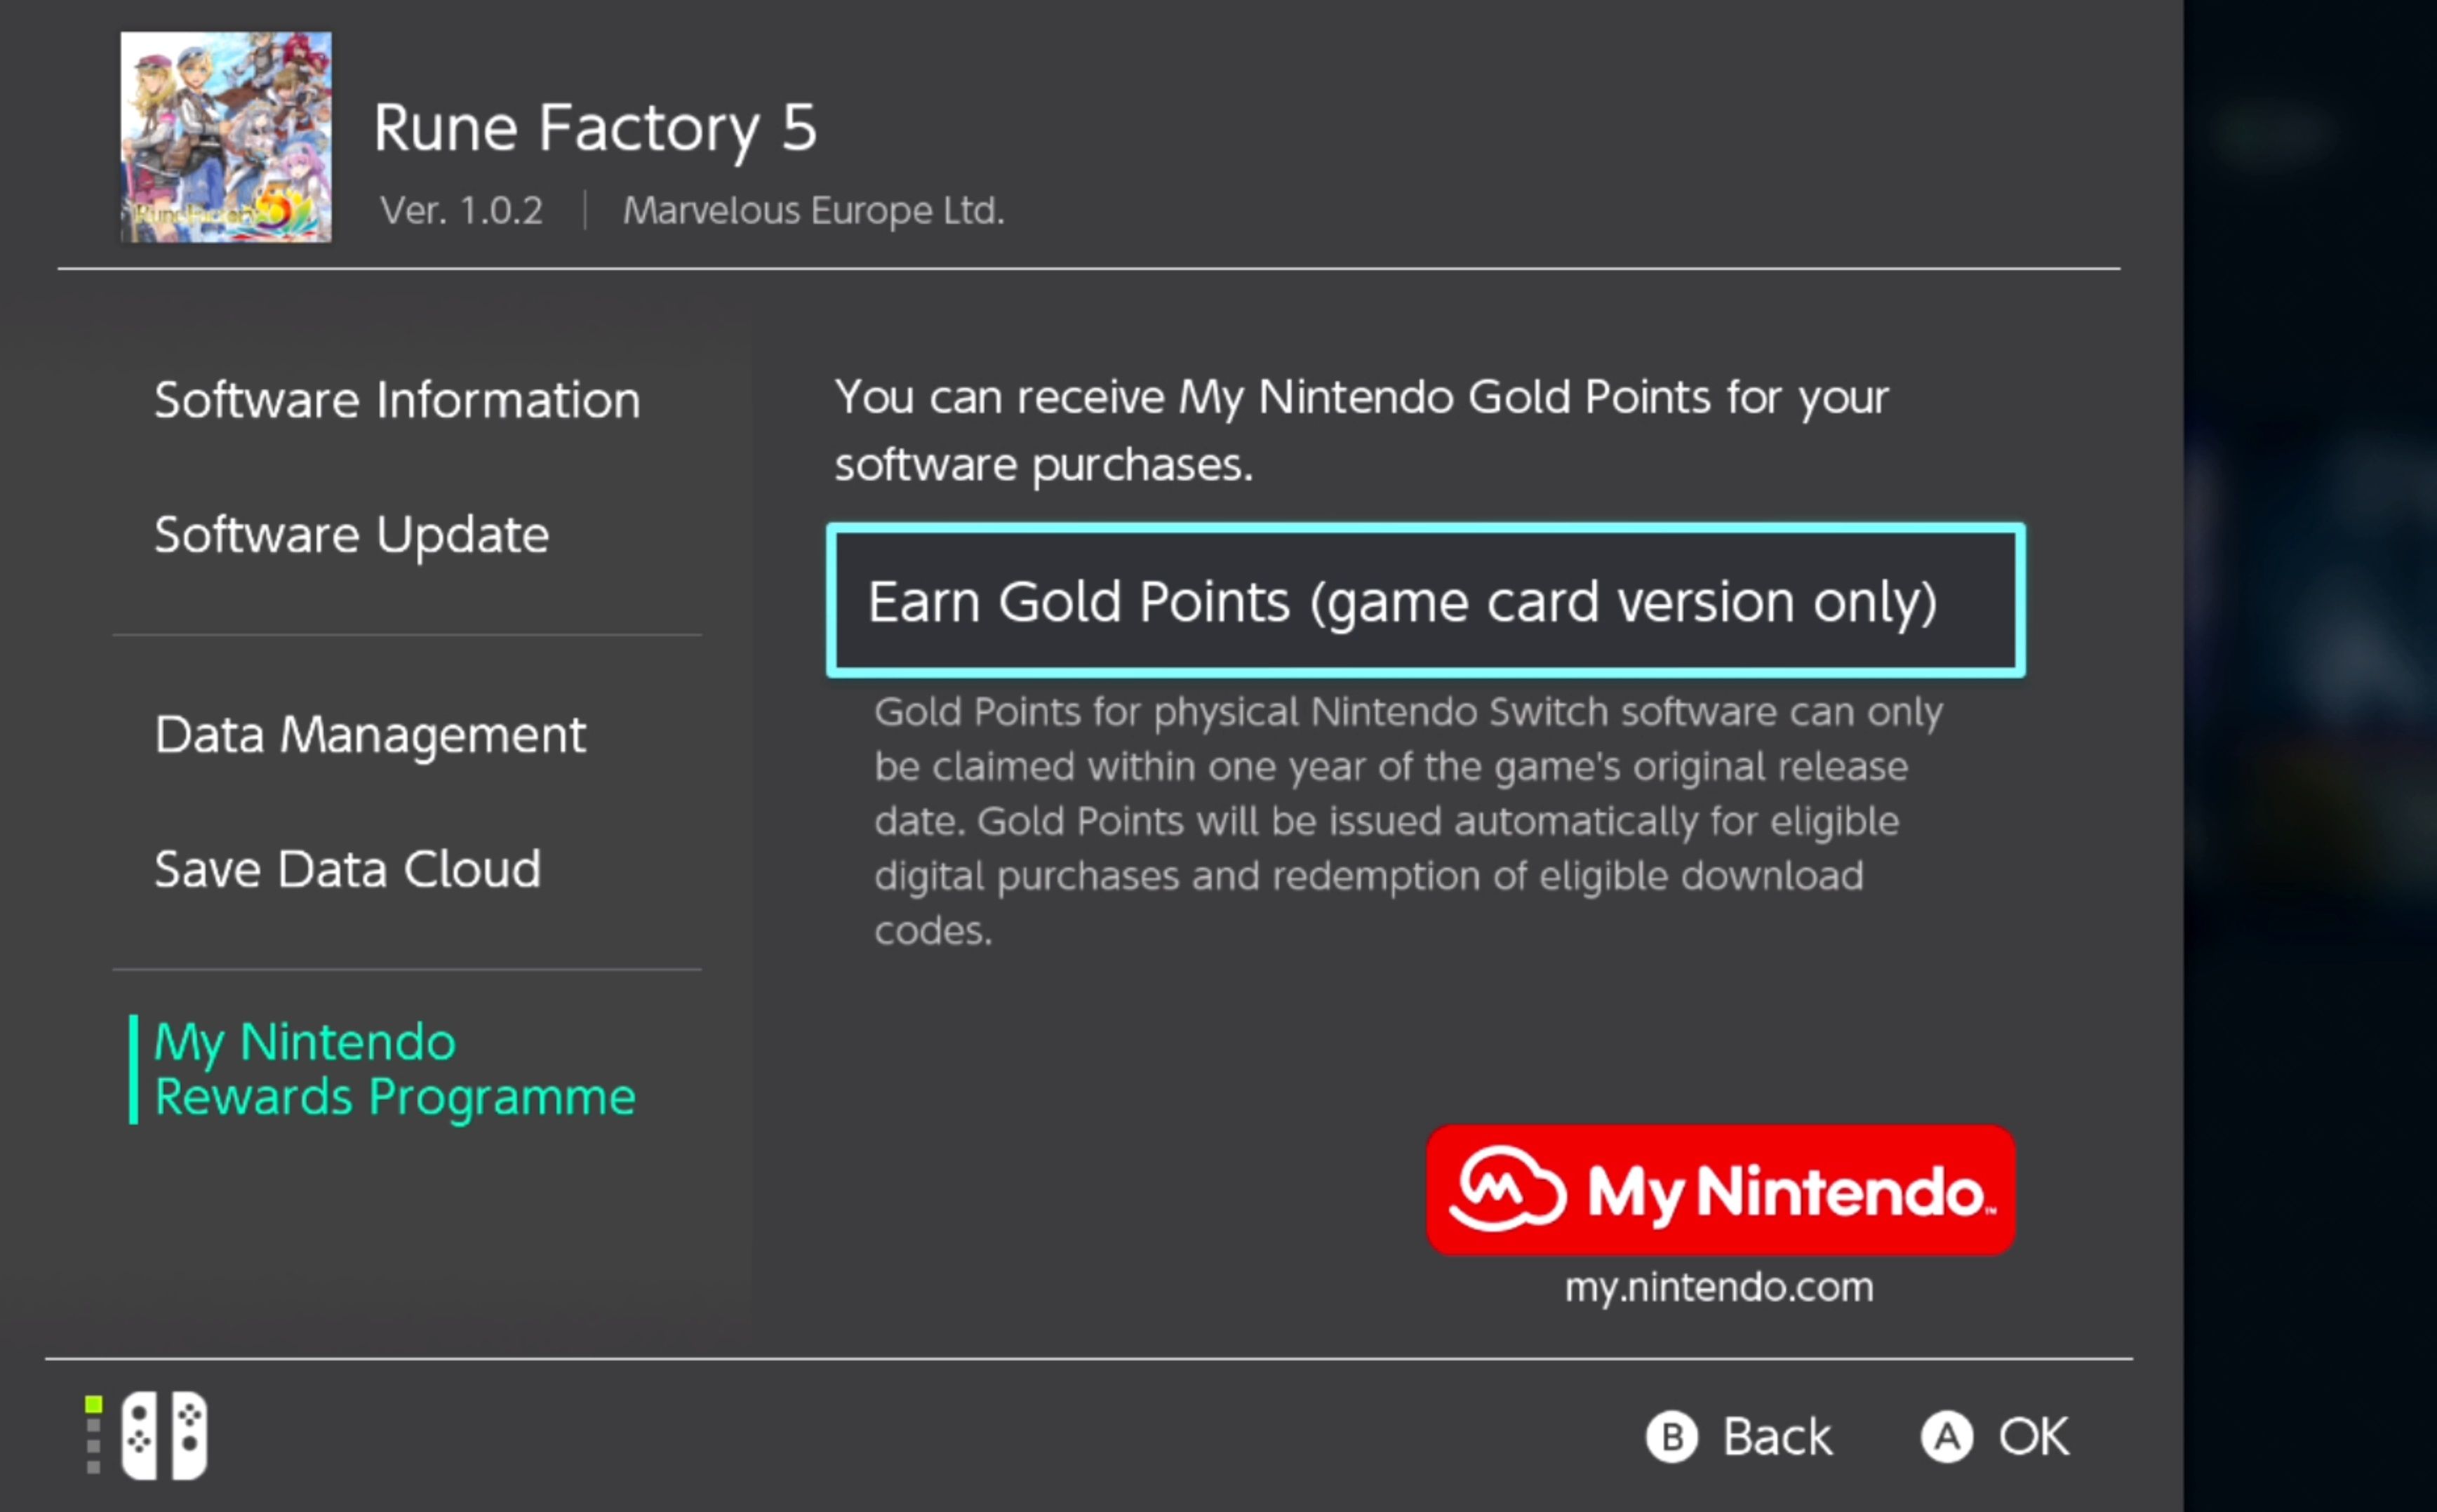 How to Claim, Use, and Track My Nintendo Gold Points